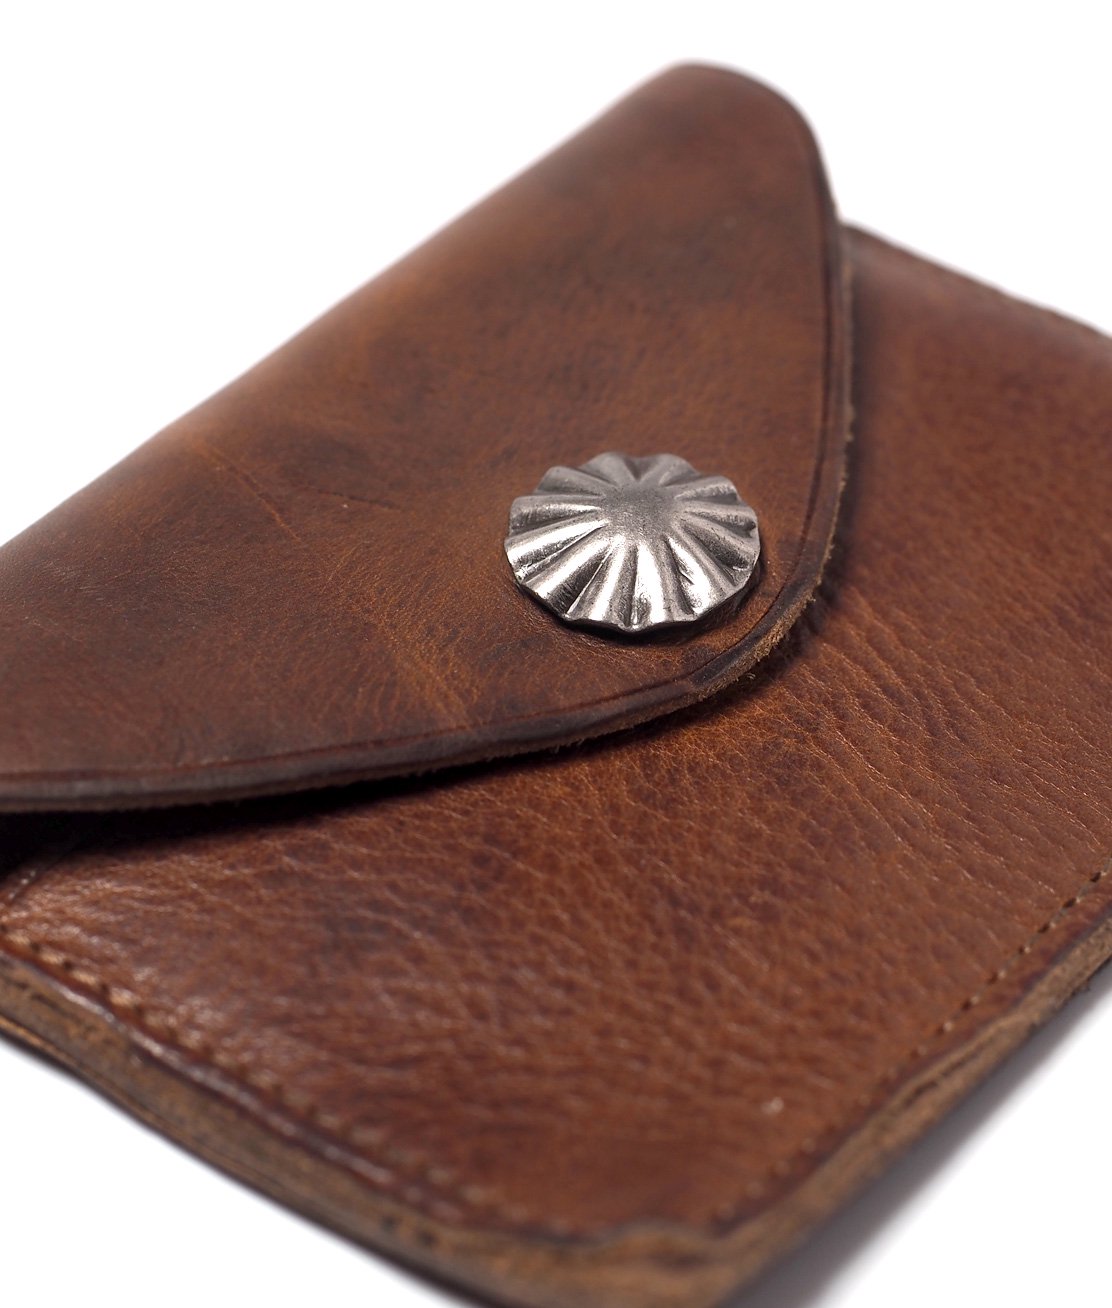 RRL】TUMBLED LEATHER CARD WALLET - DARK BROWN カードケース